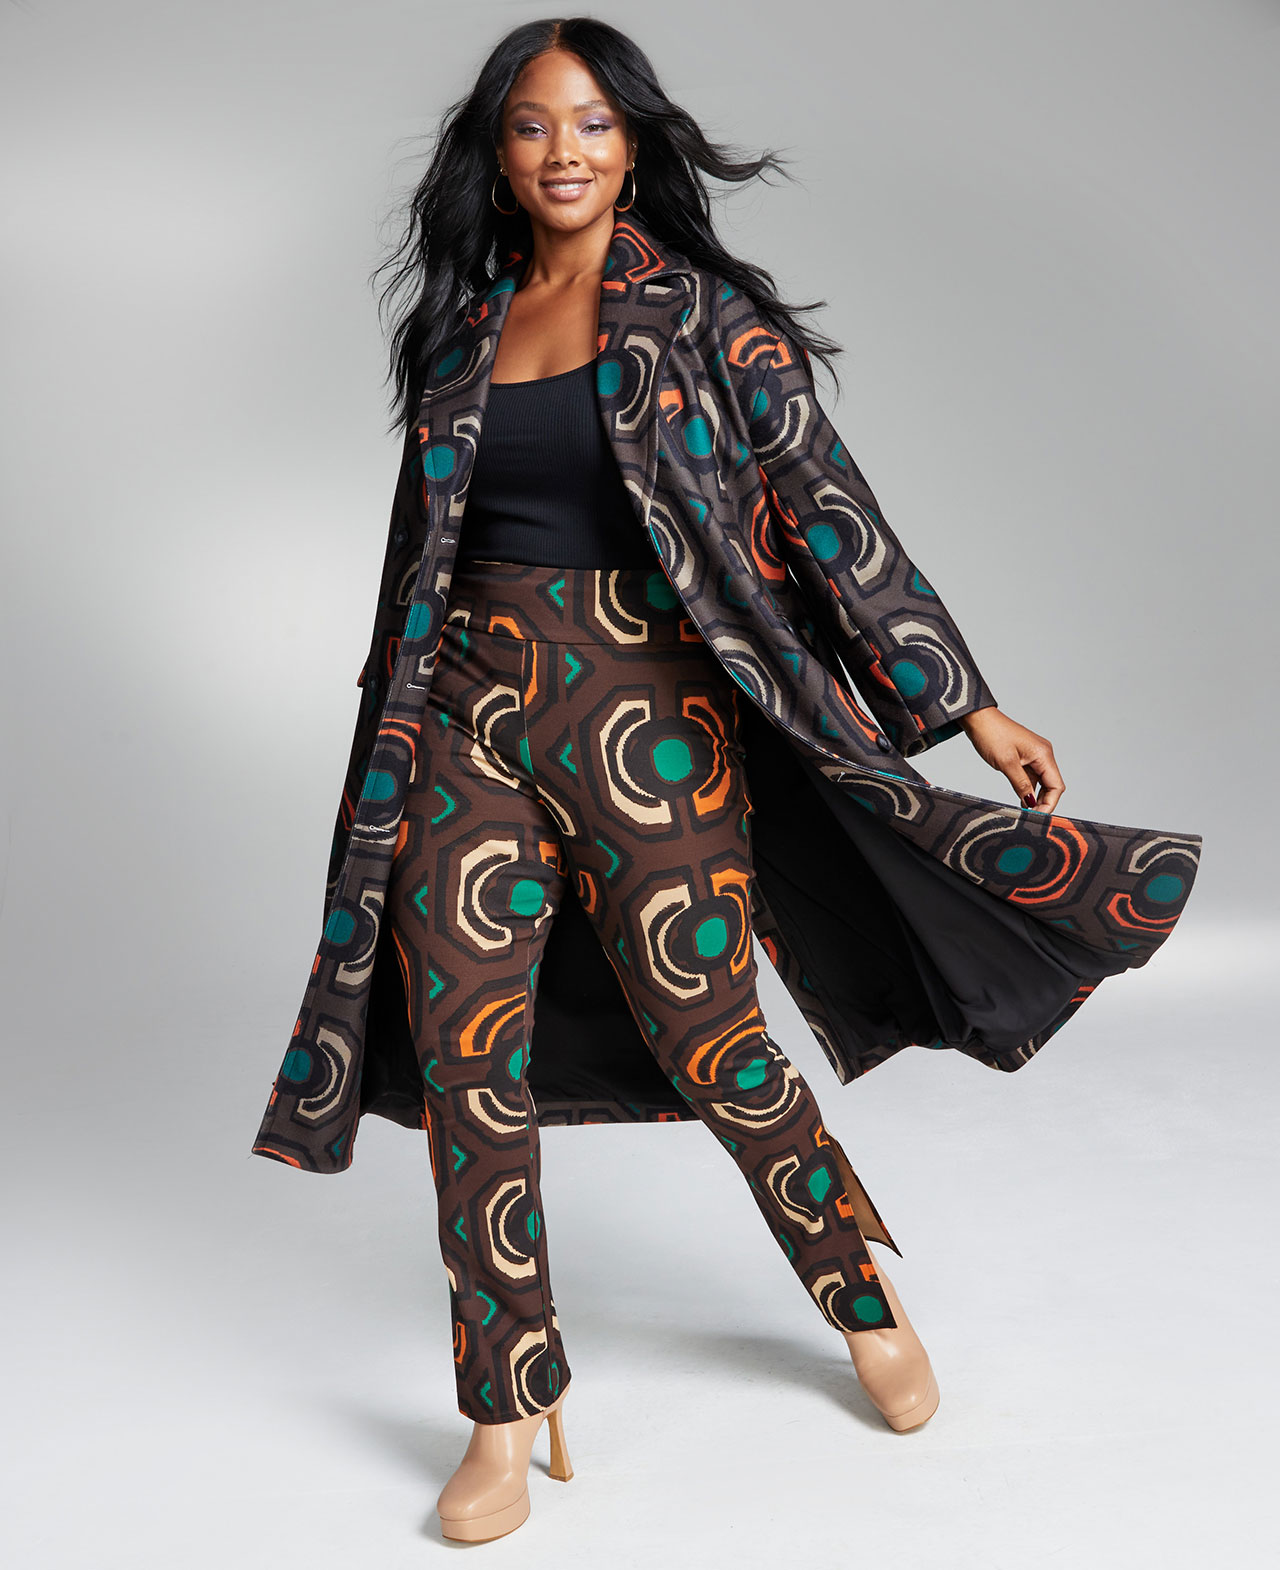 Macy's Icons Of Style Features GooGoo Atkins Plus Size Clothing Designs